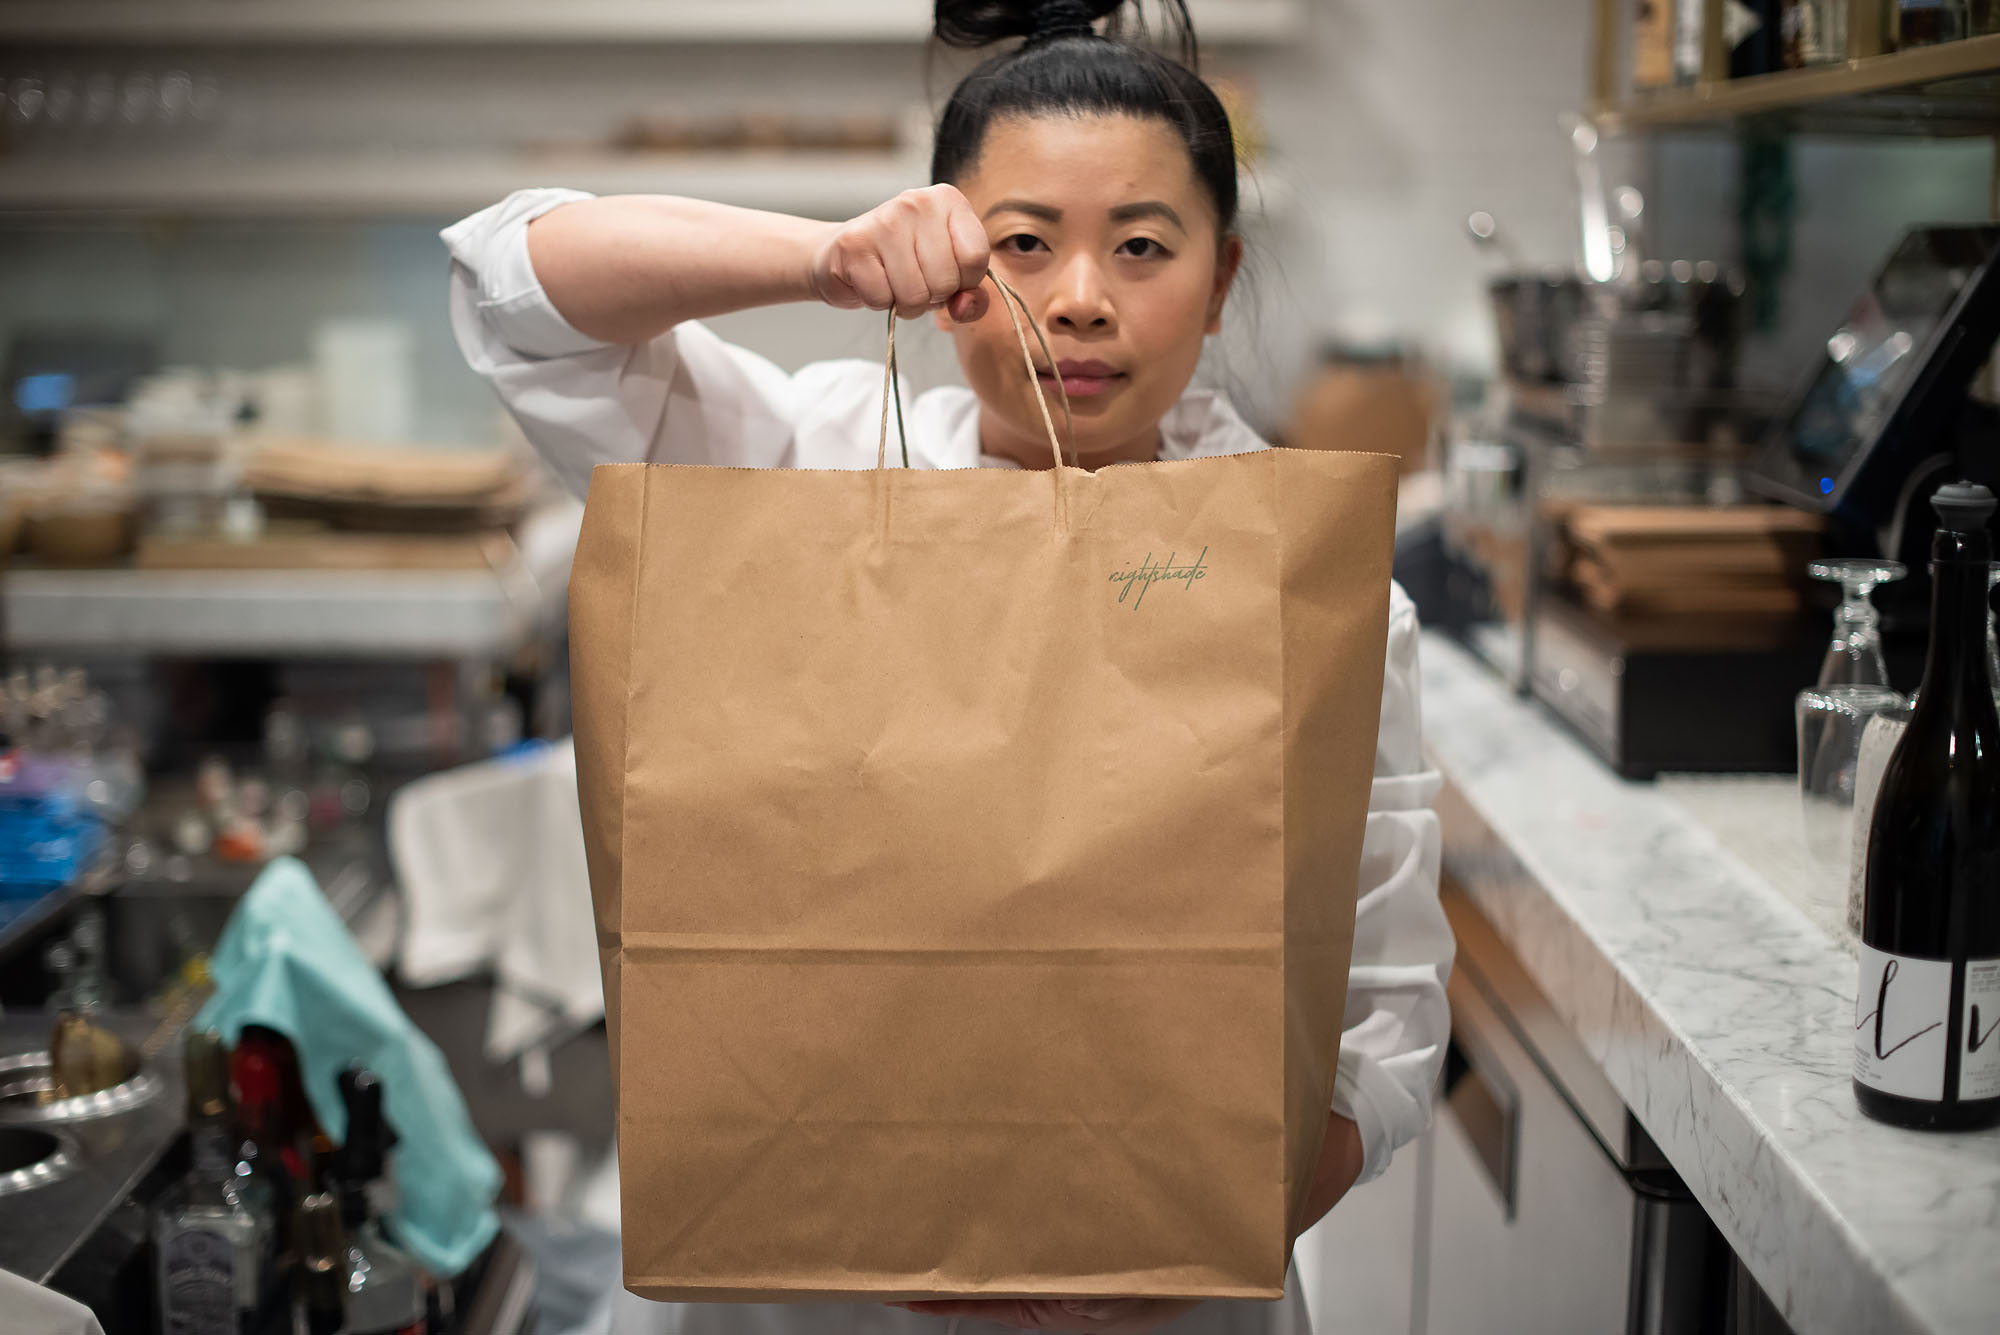 Nightshade owner and chef Mei Lin holds a brown bag of takeout inside her LA restaurant.